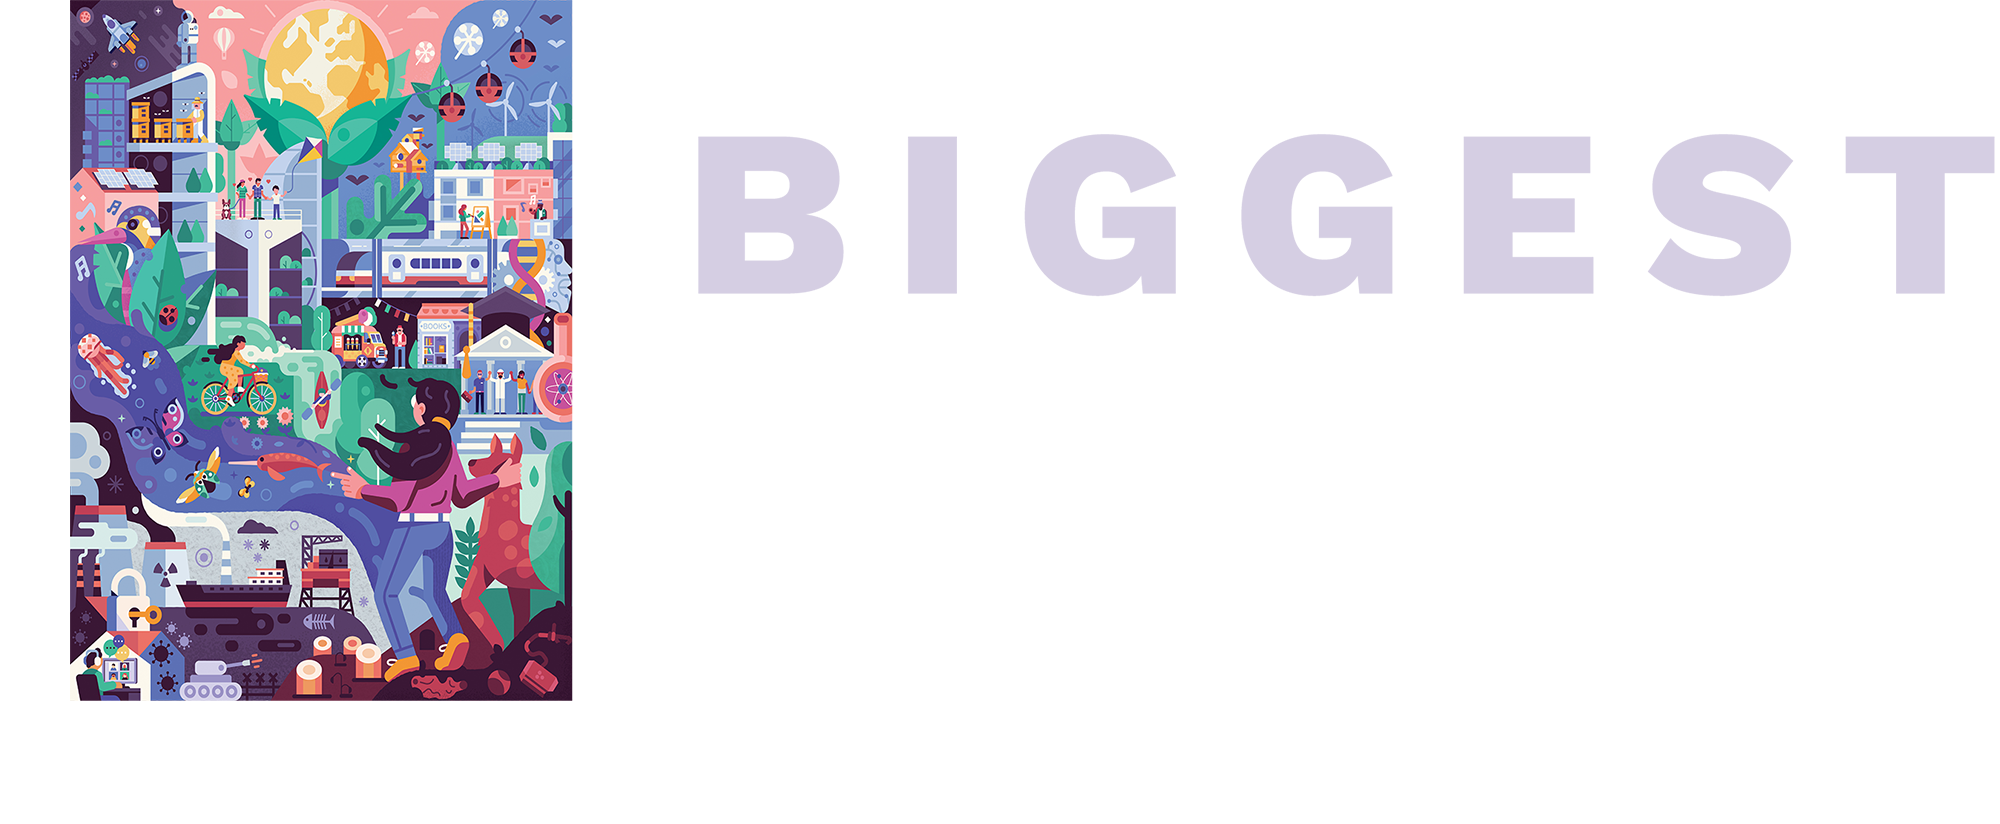 whats your biggest dream banner